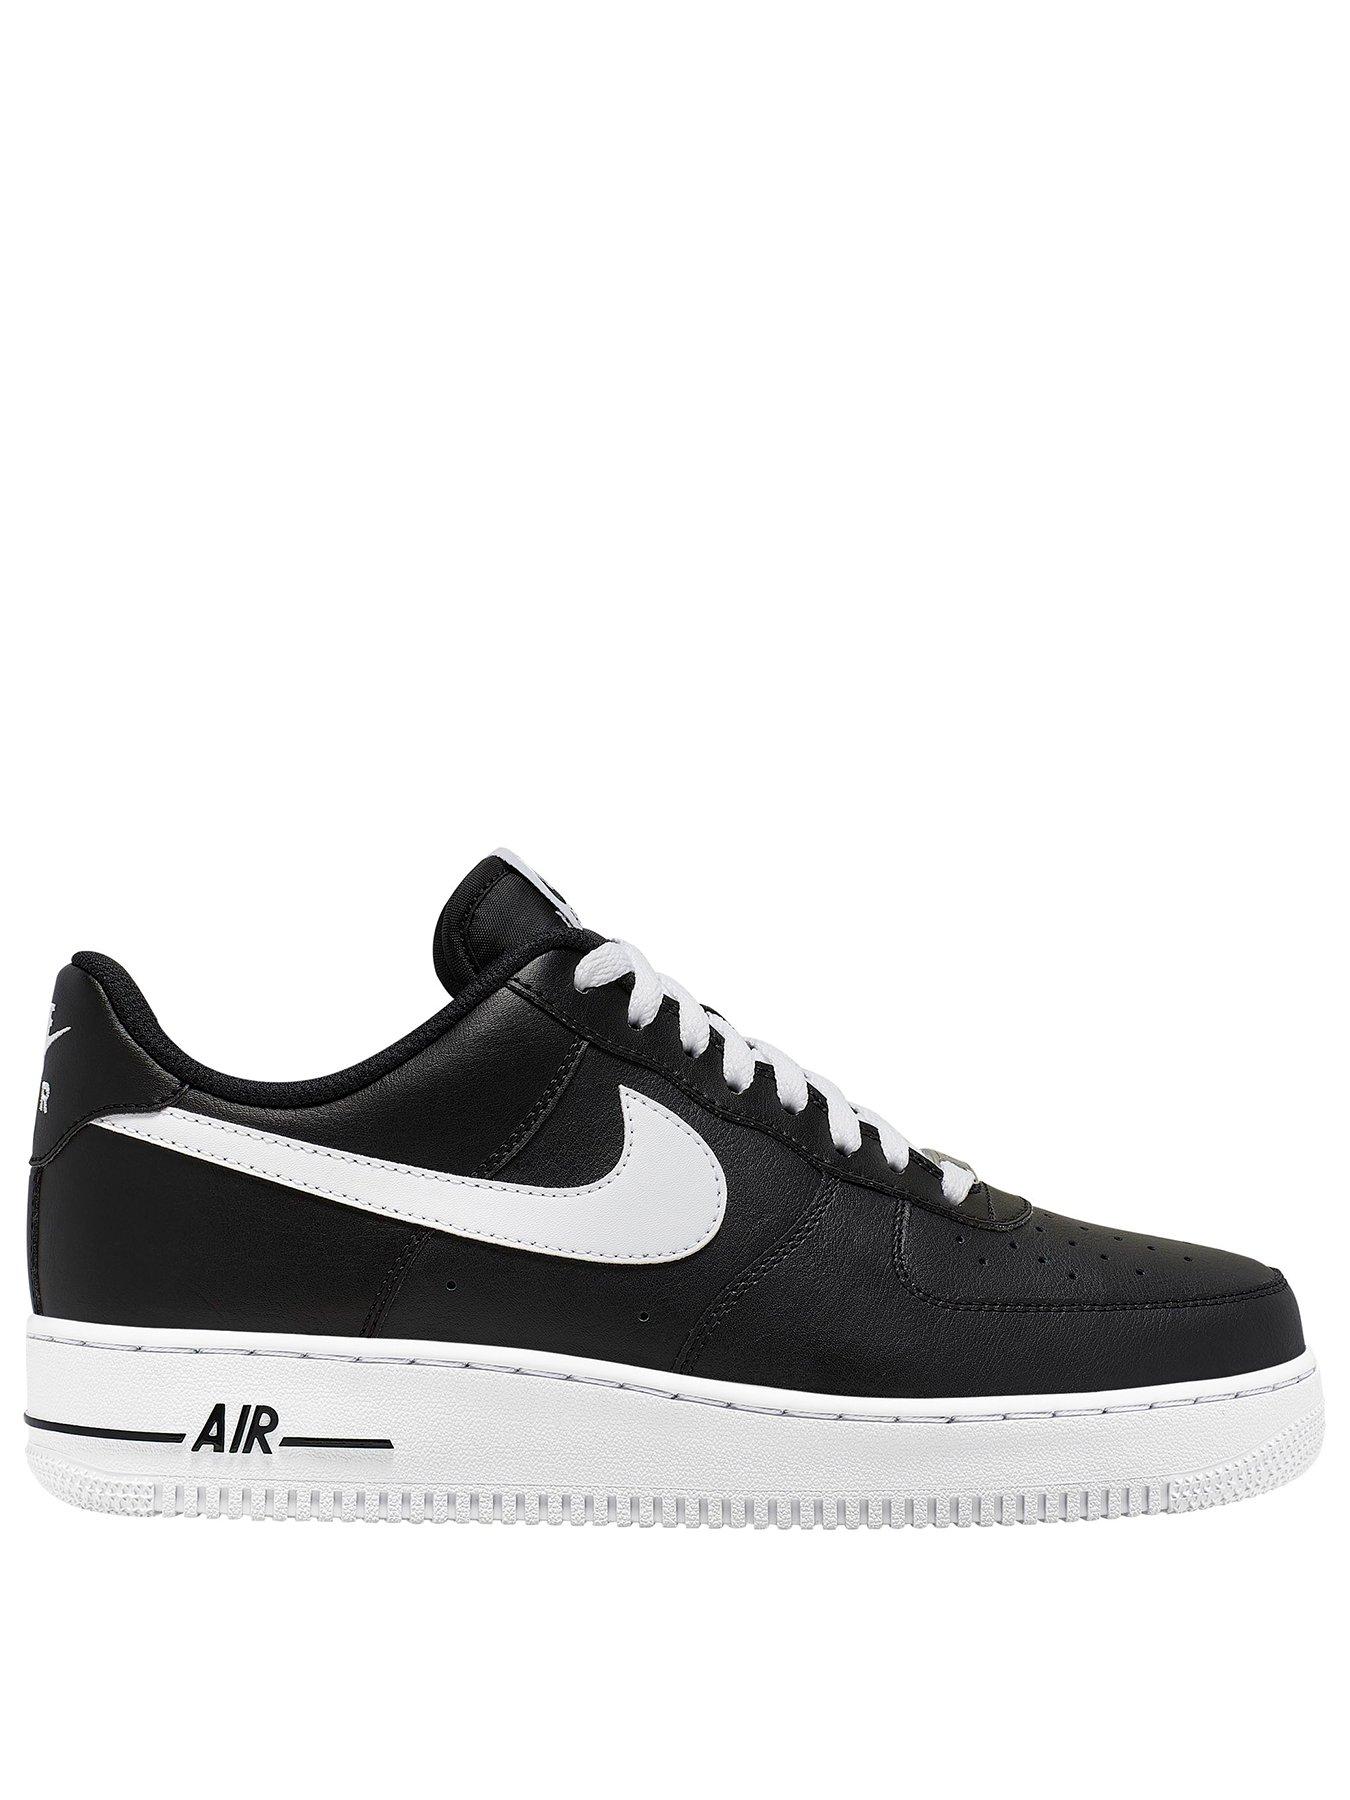 black and white air force 1 size 6